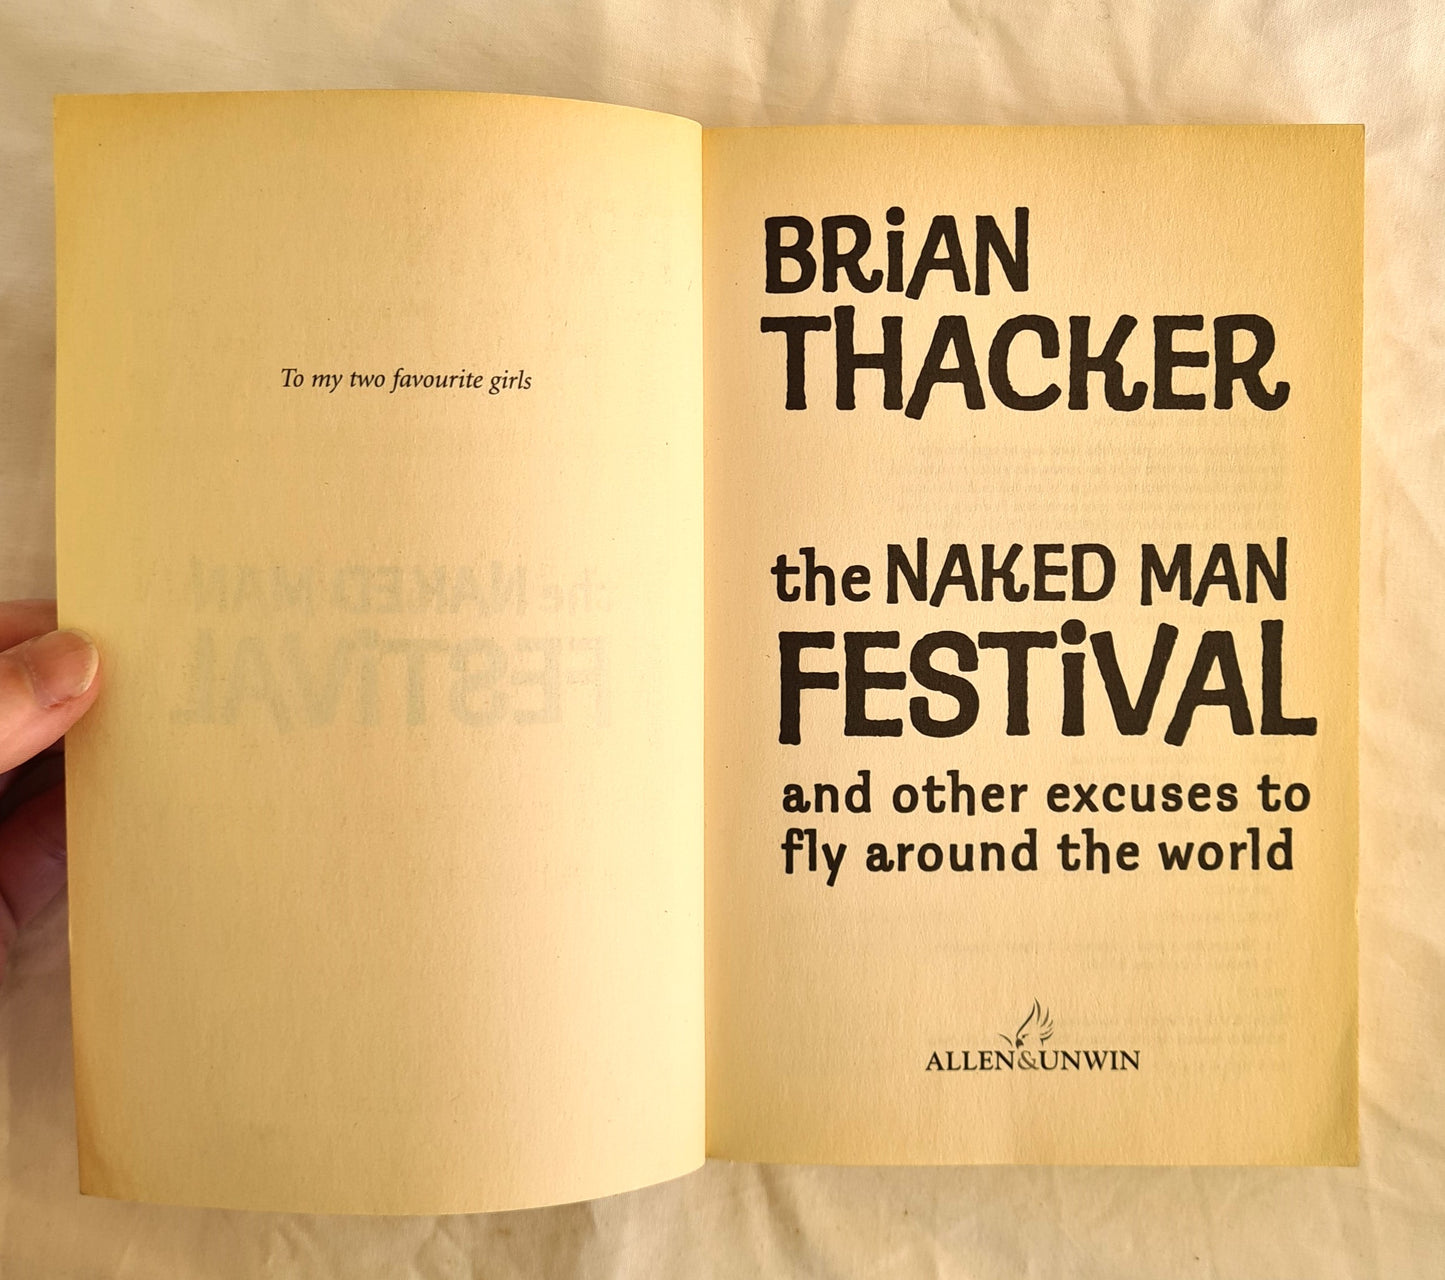 The Naked Man Festival by Brian Thacker